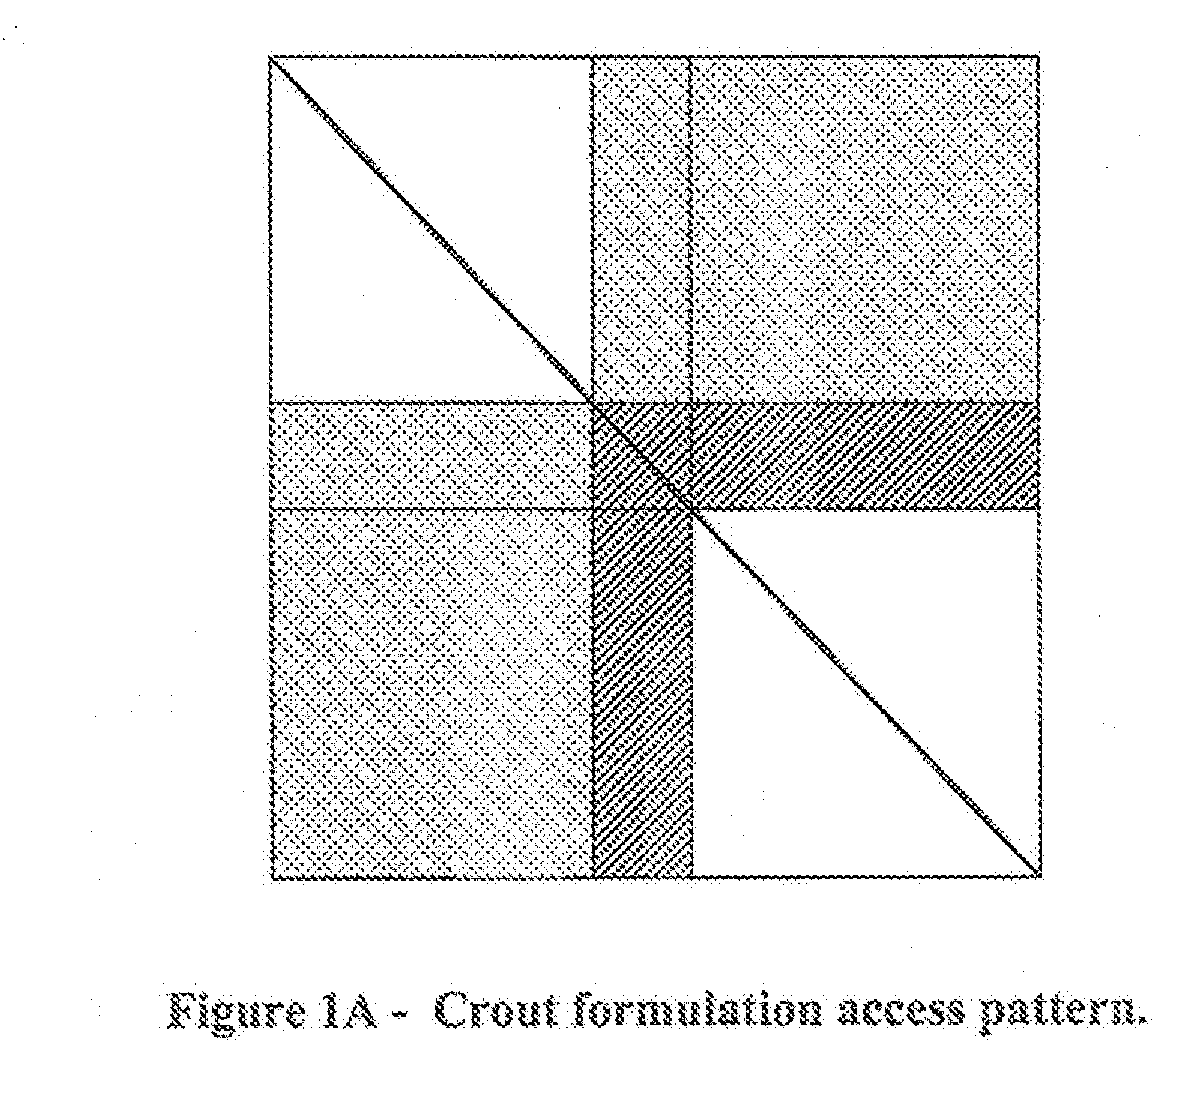 Method for Using a Graphics Processing Unit for Accelerated Iterative and Direct Solutions to Systems of Linear Equations